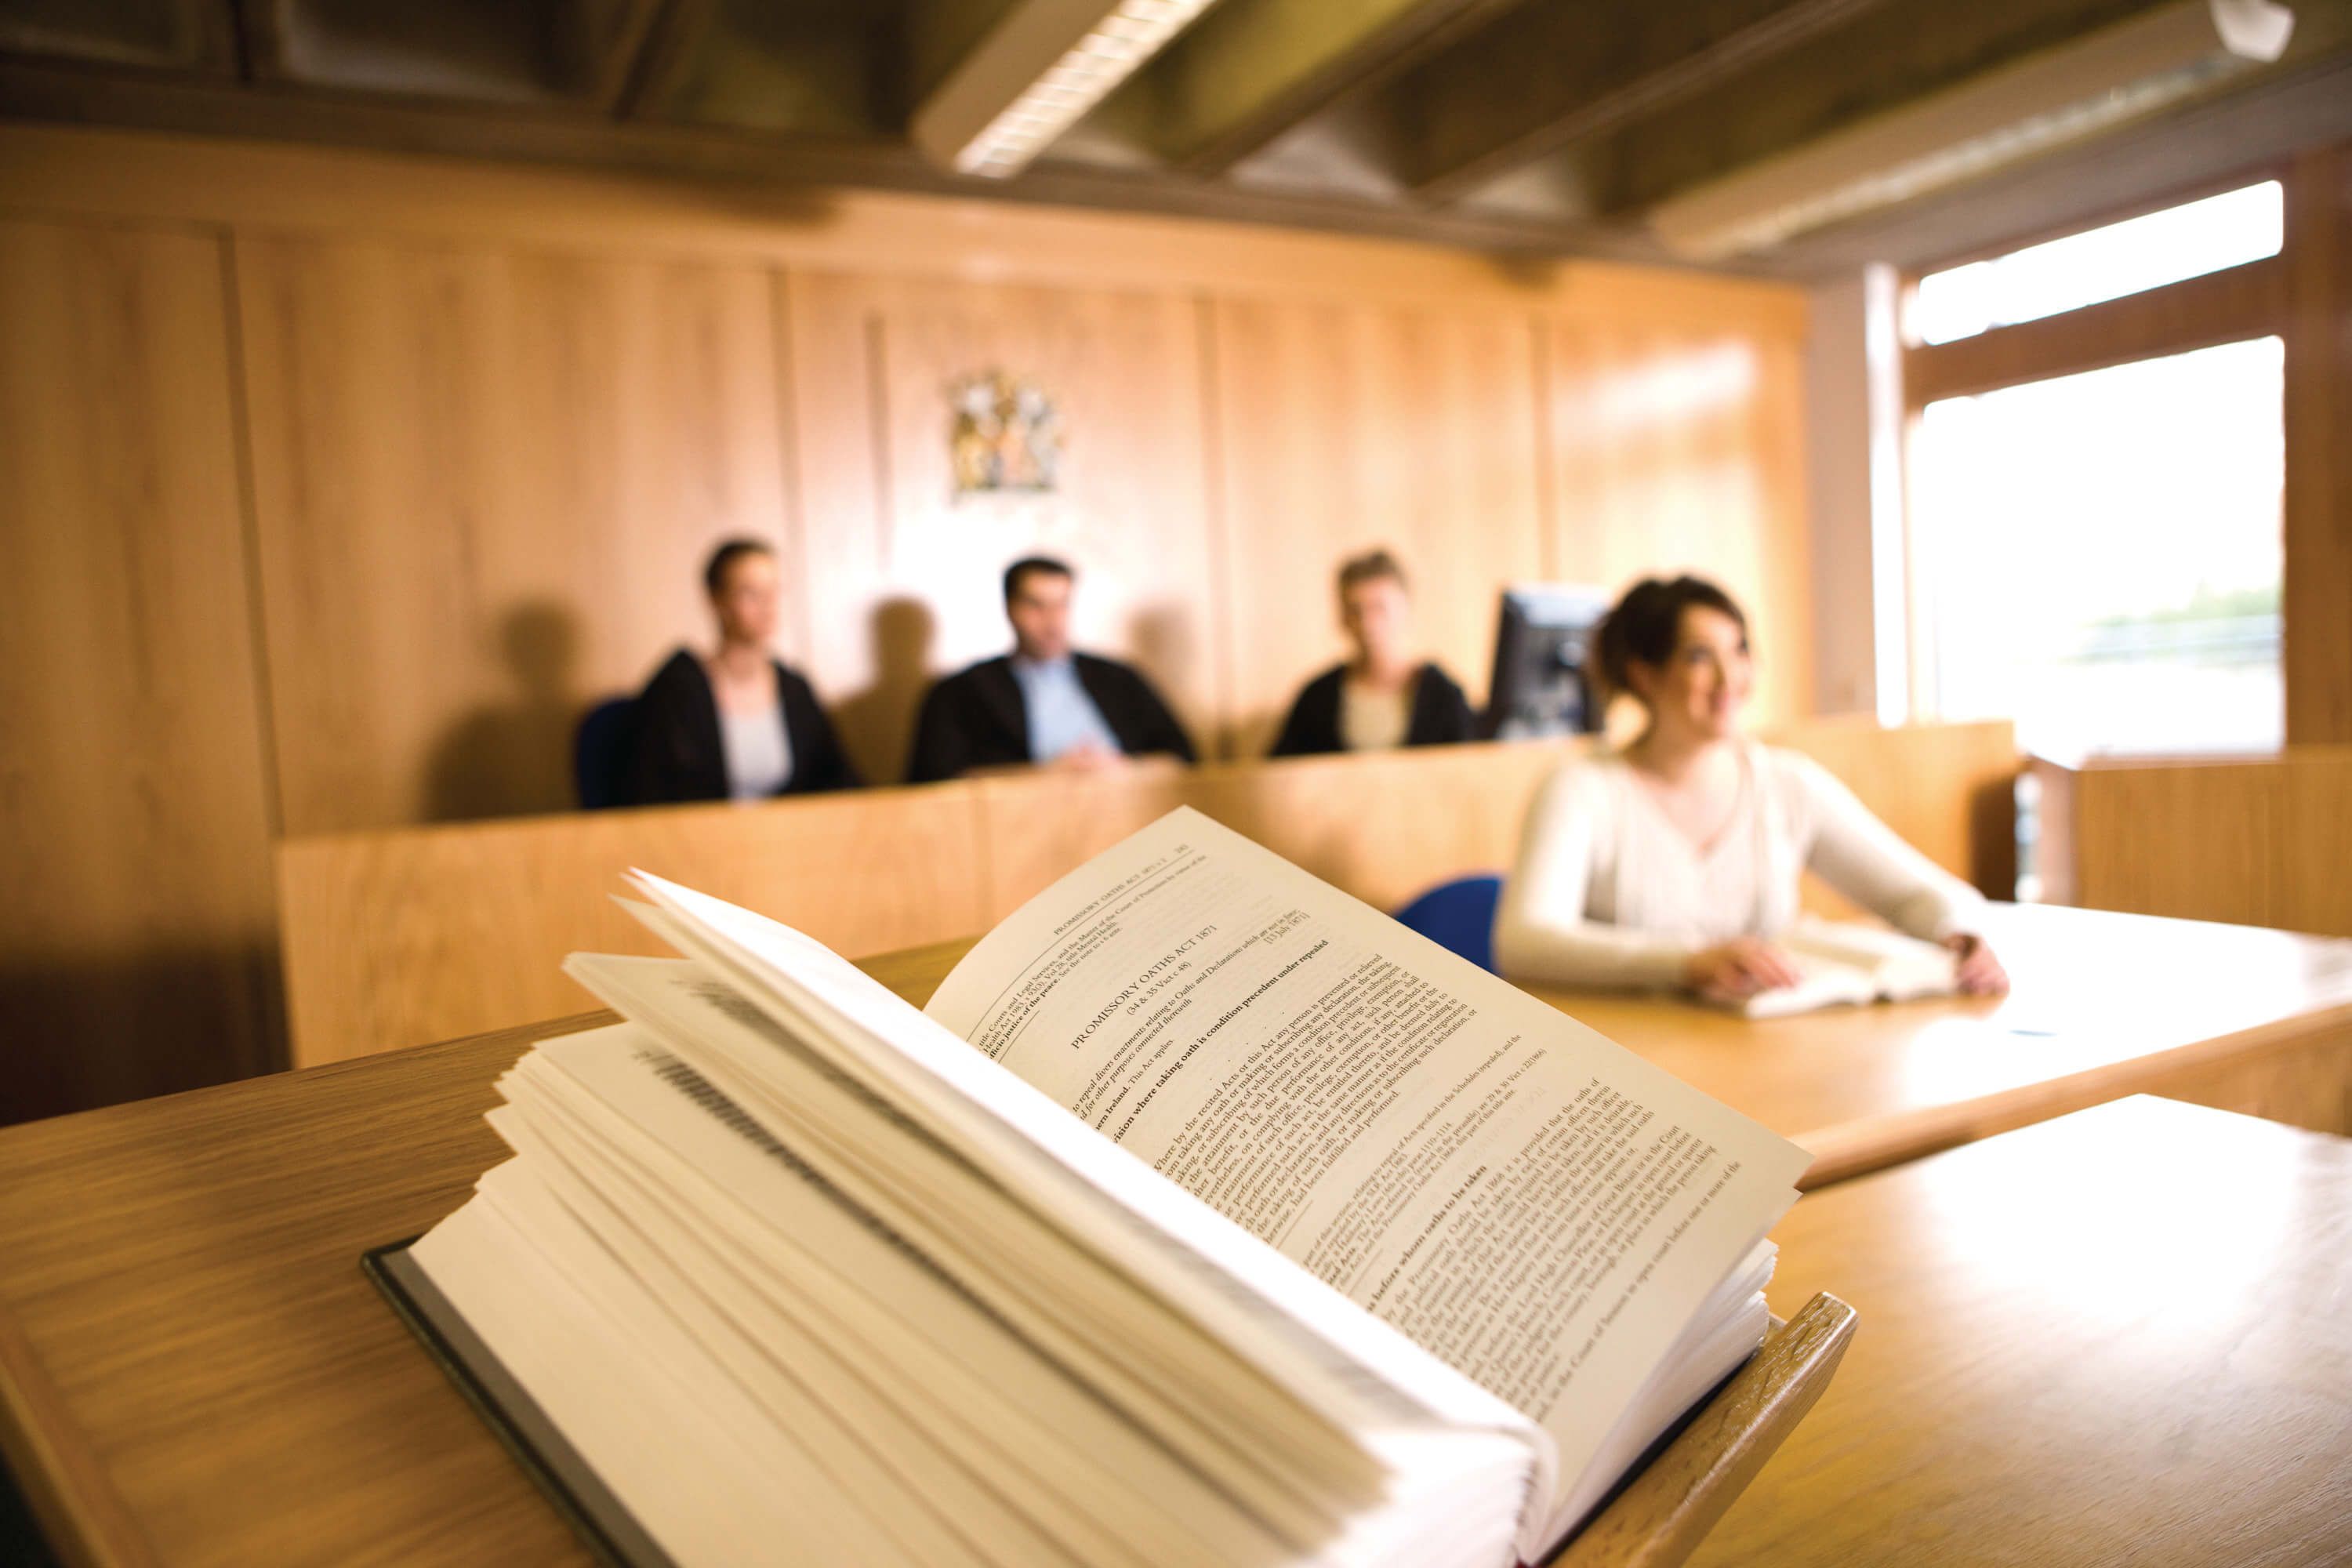 Four Law students sitting in the mock law court out of focus, with an open book in focus in the foreground